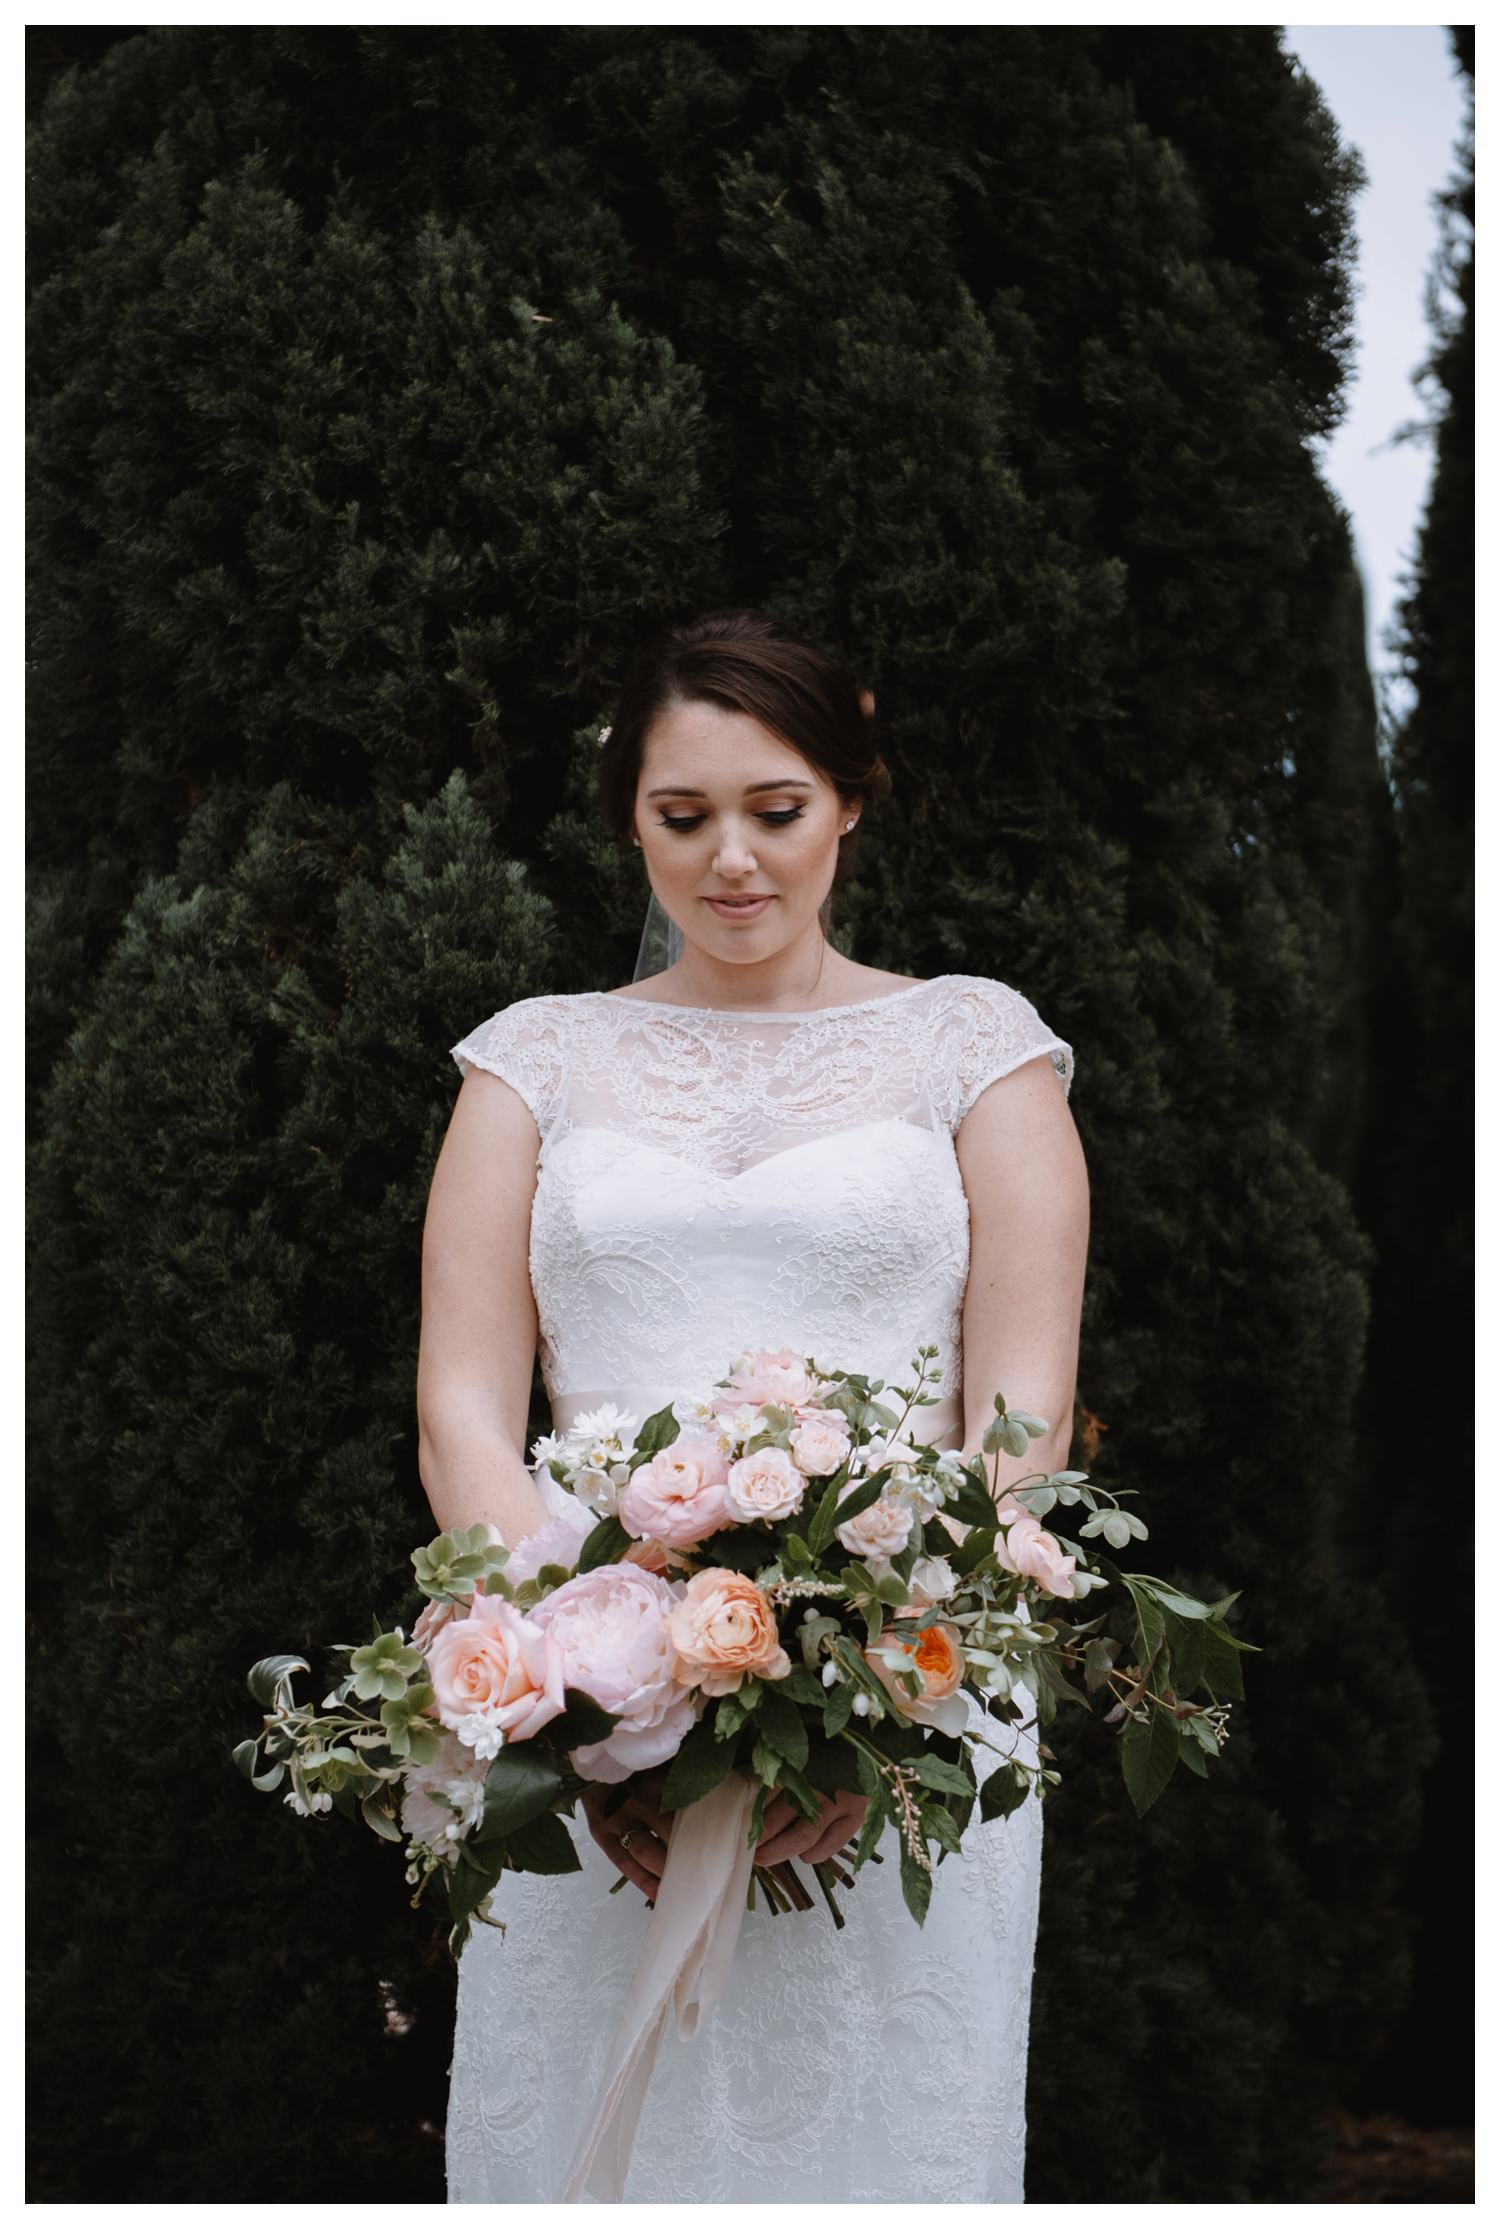 Beautiful pale pastel colors surround a bride on her wedding day